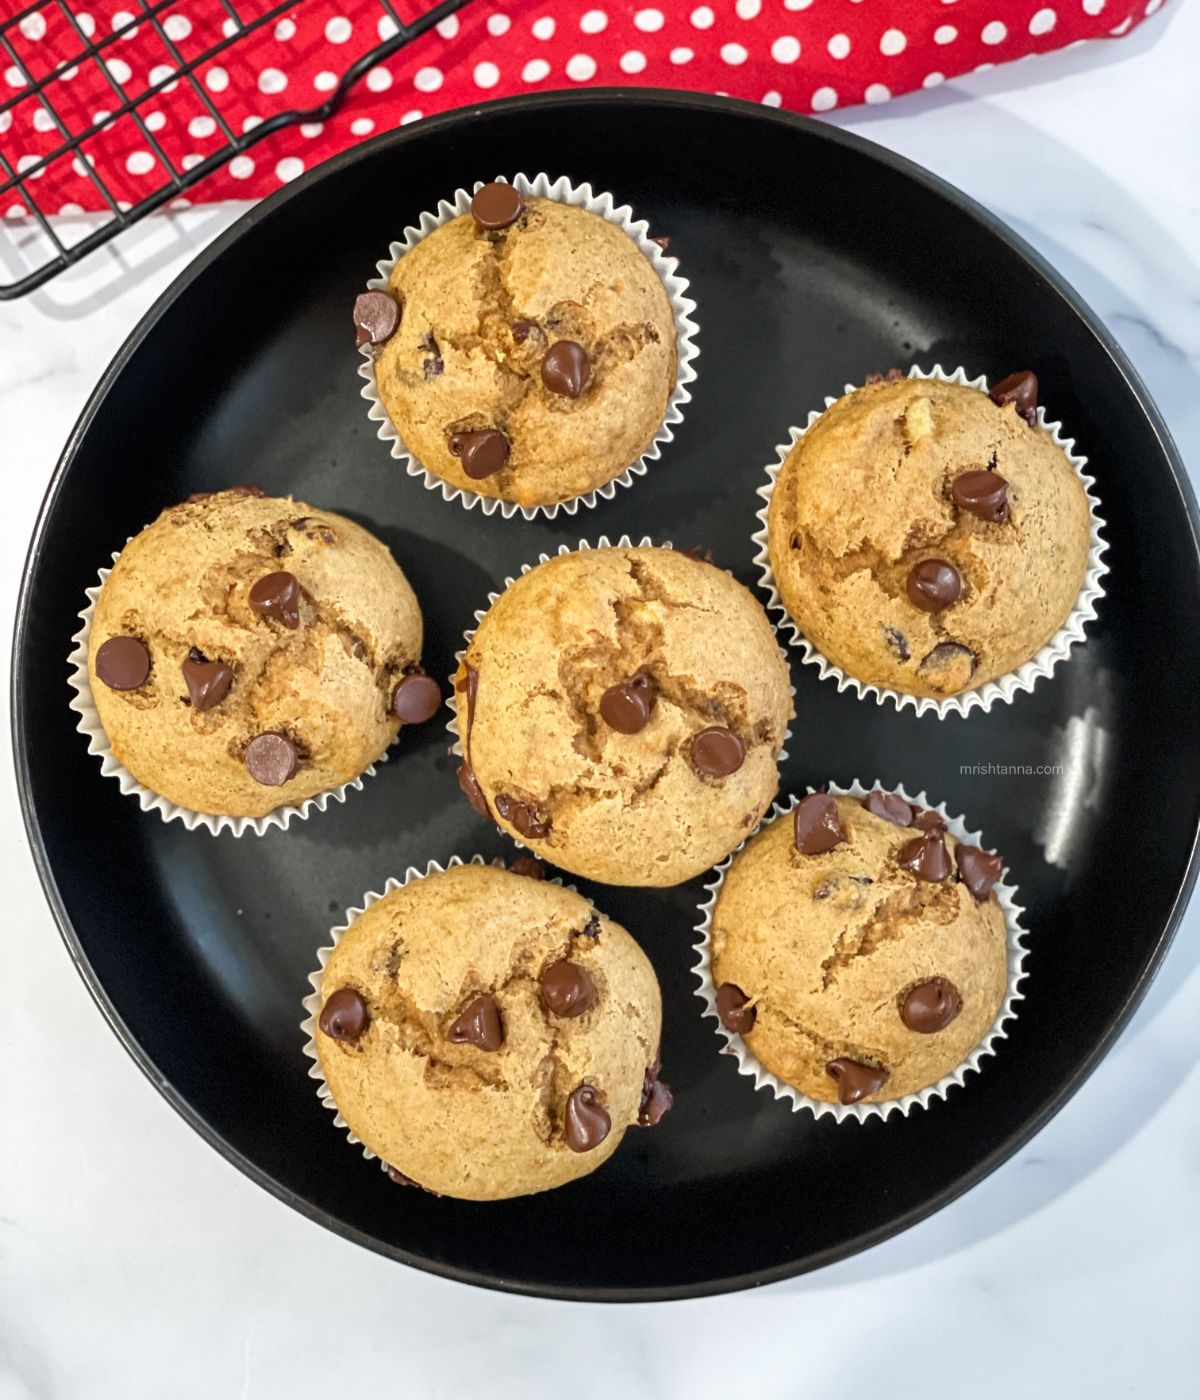 Almond butter muffins are on the plate.